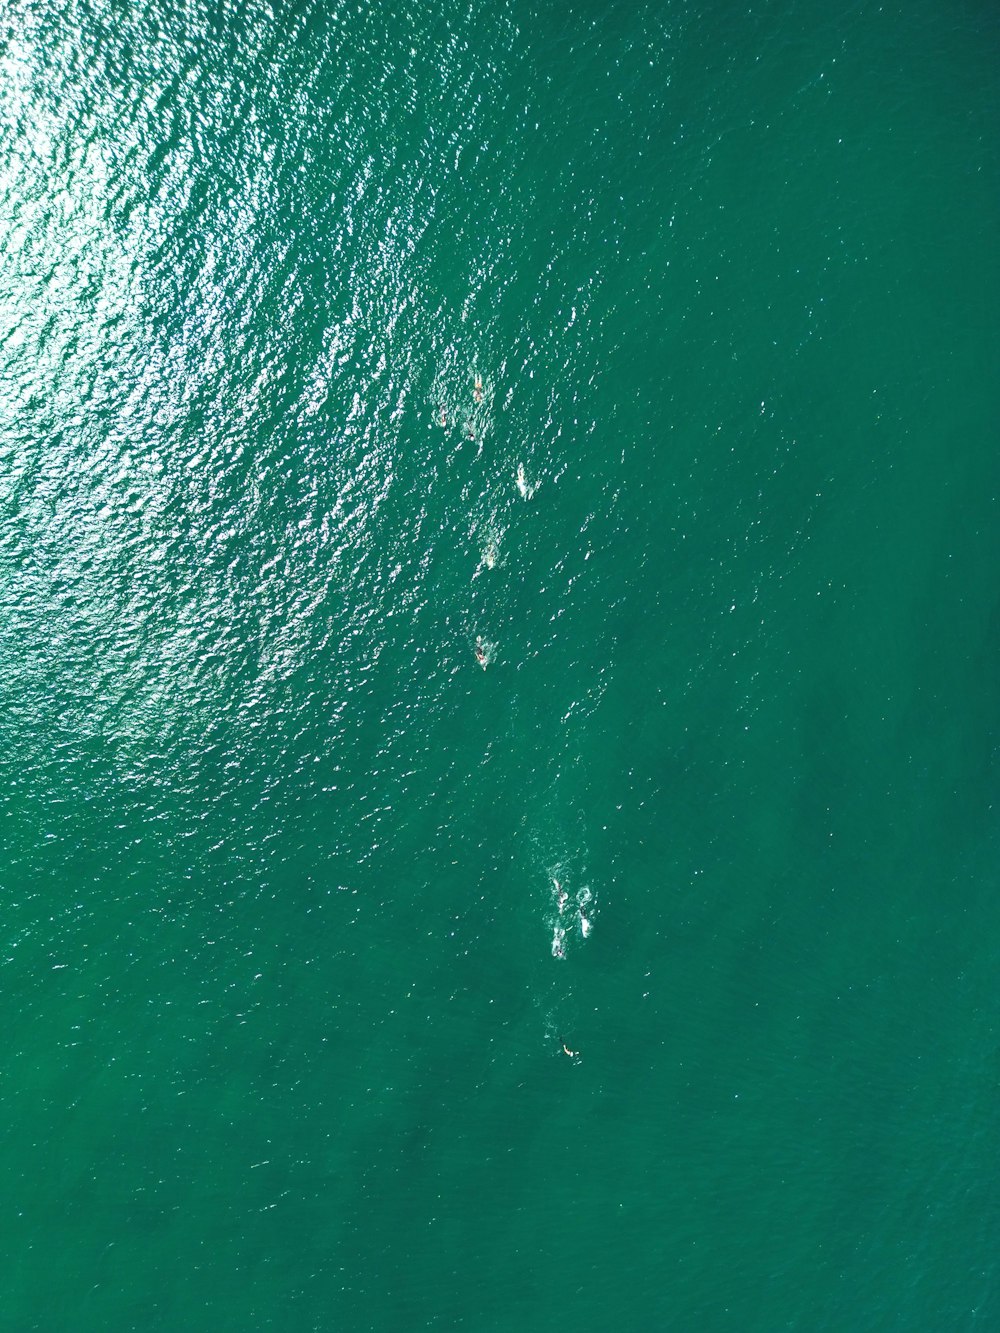 a couple of people riding on top of a surfboard in the ocean